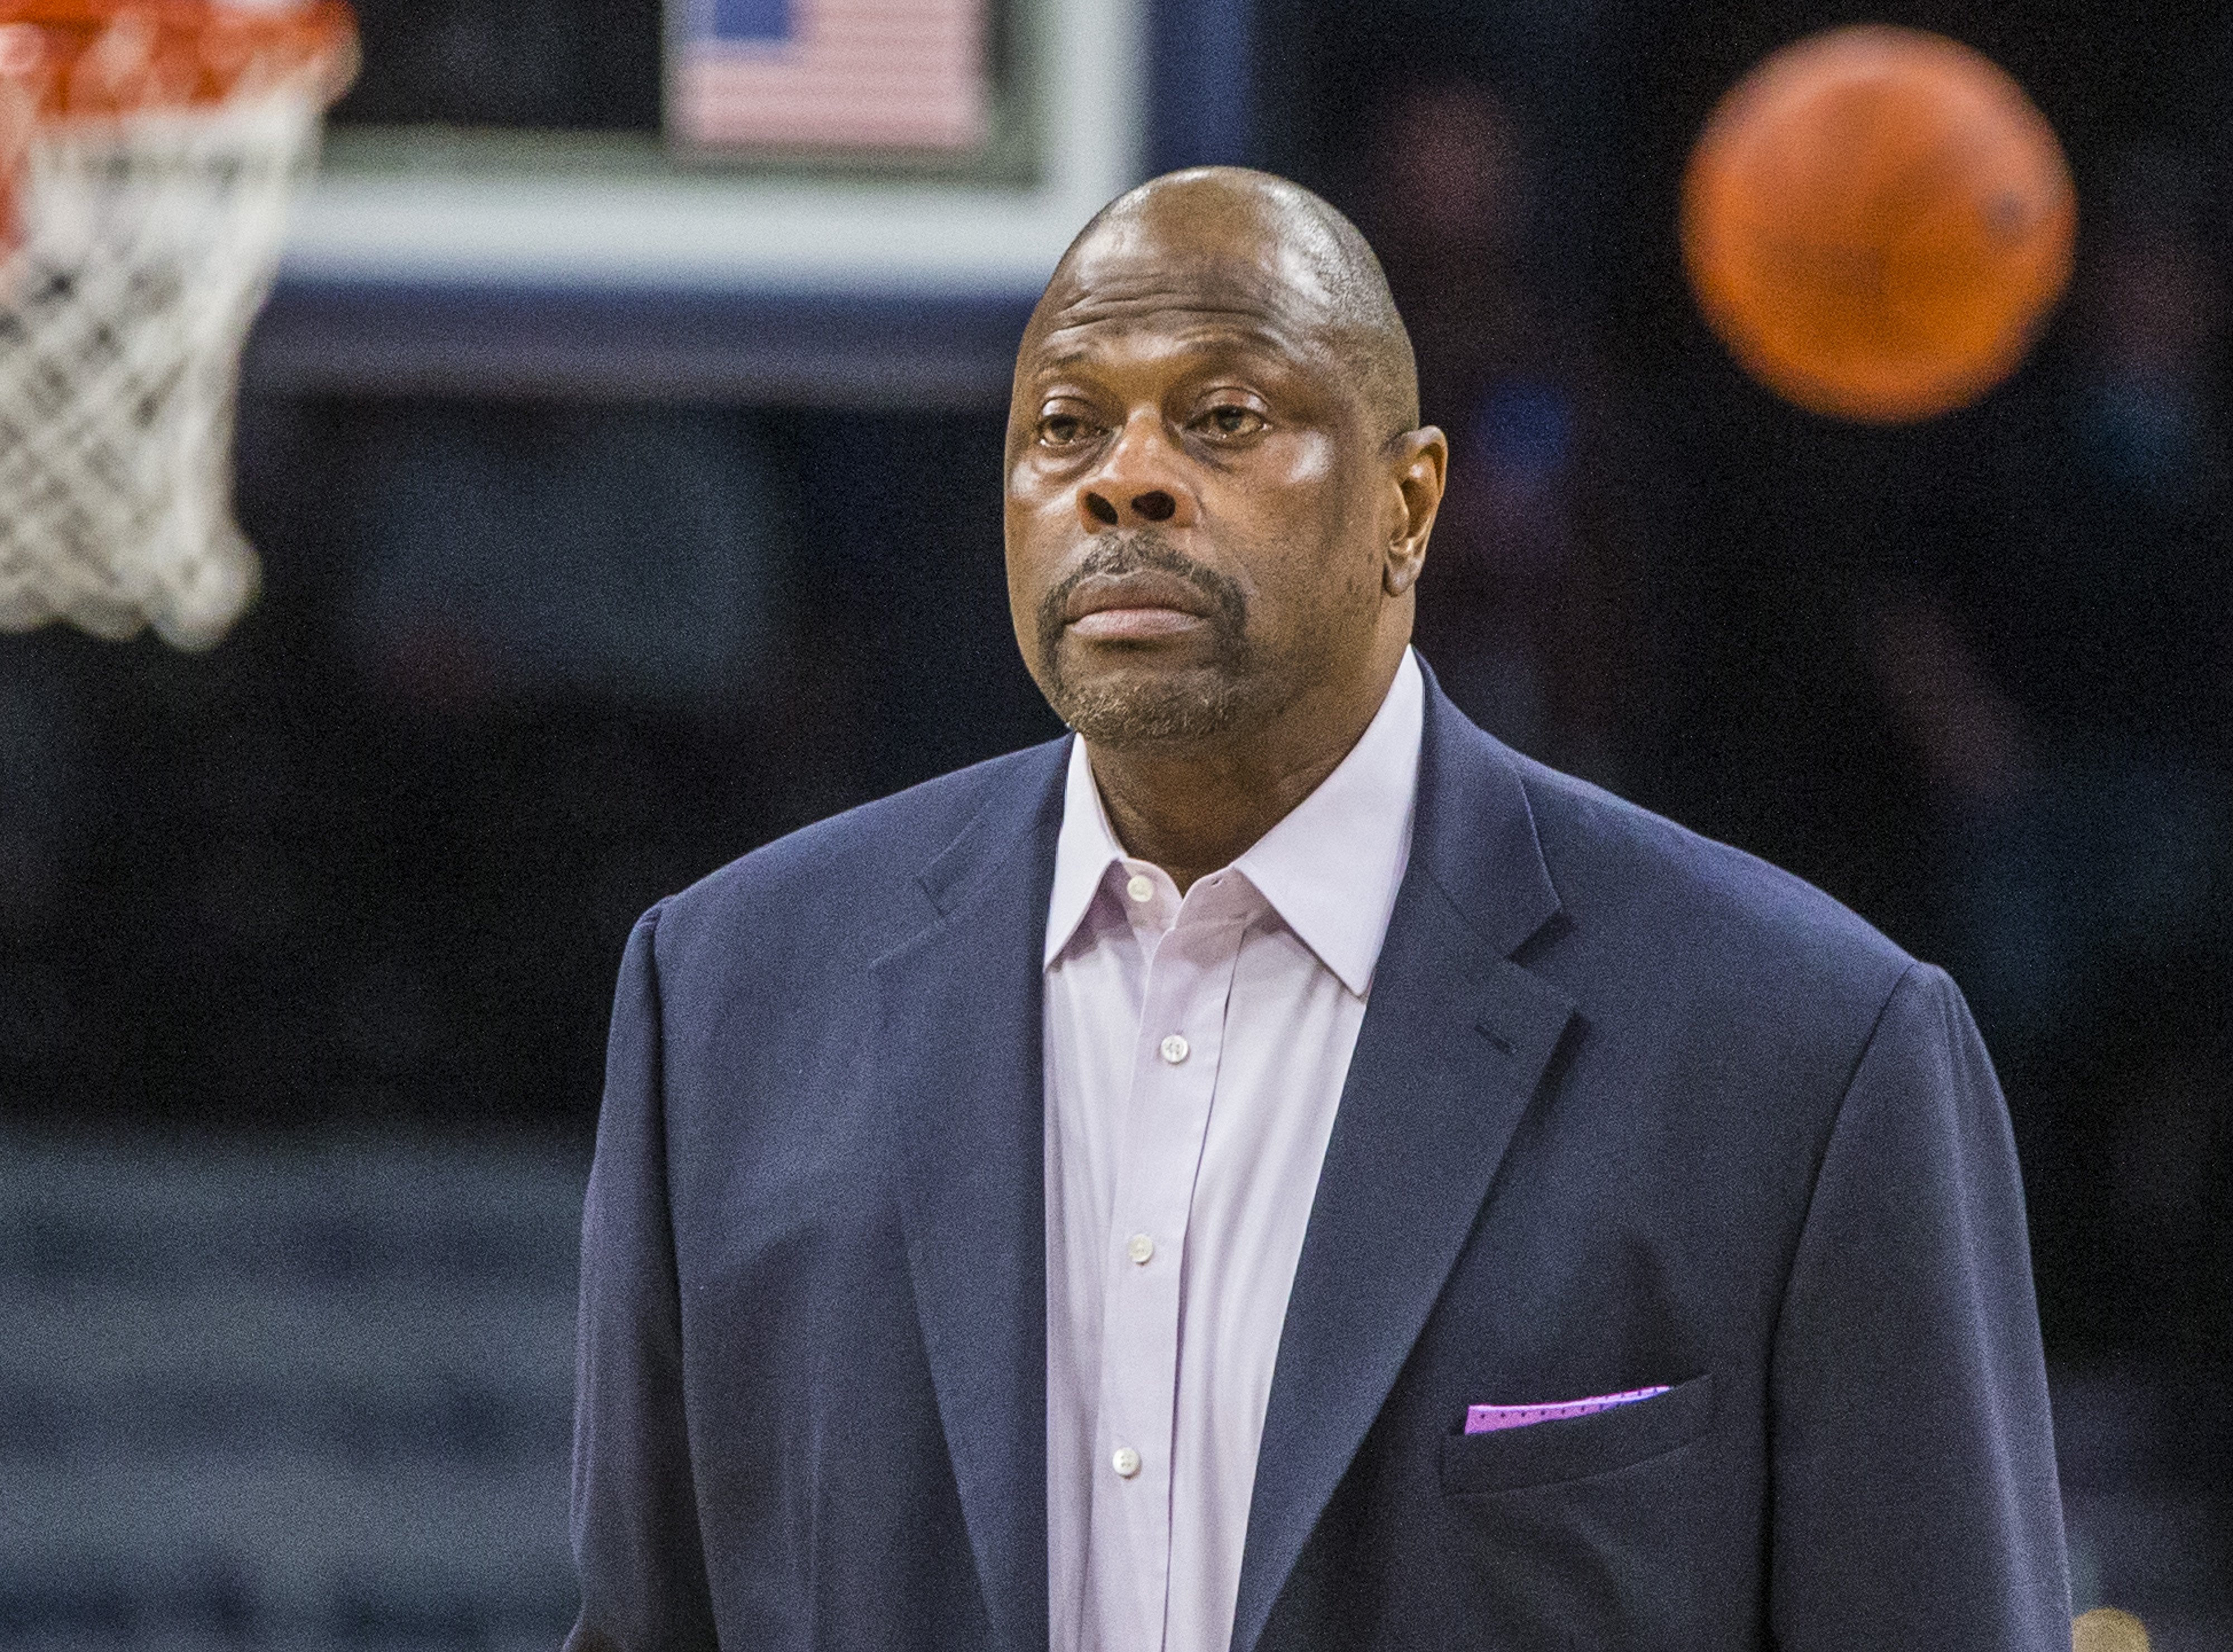 Patrick Ewing head during a game between Butler and Georgetown at Capital One Arena on January 28, 2020 in Washington, DC | Photo: GettyImages